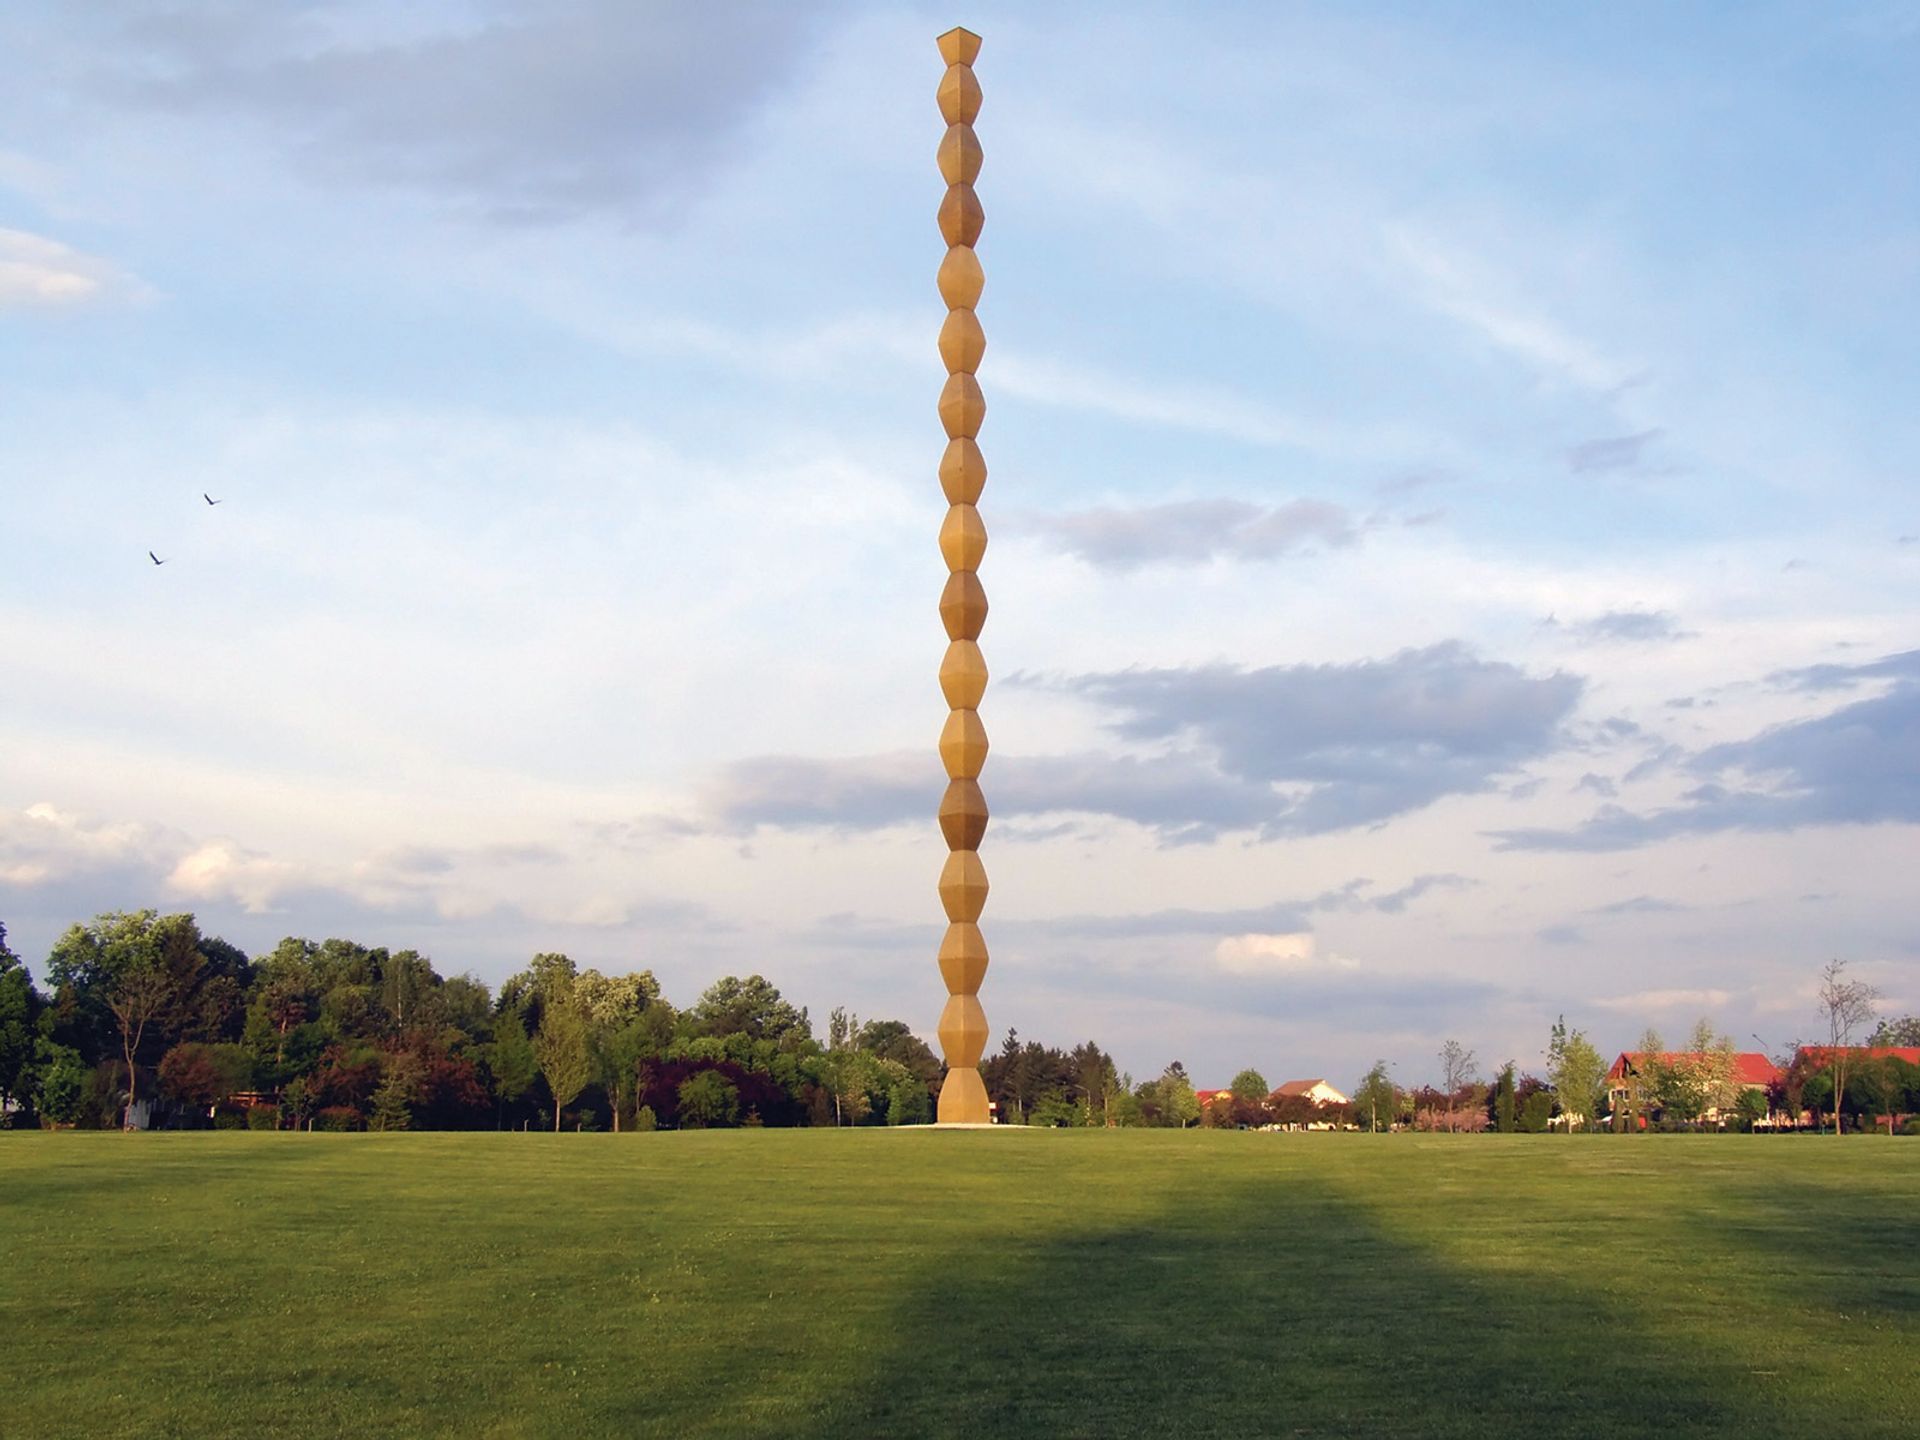 Endless Column (1938) is one of three of Brancusi’s sculptures in Targu Jiu. In 2002, the Romanian city was sued for reproducing images of the sculptures Photo: Mike Master. © Succession Brâncuși—All rights reserved. ADAGP, Paris and DACS, London 2021